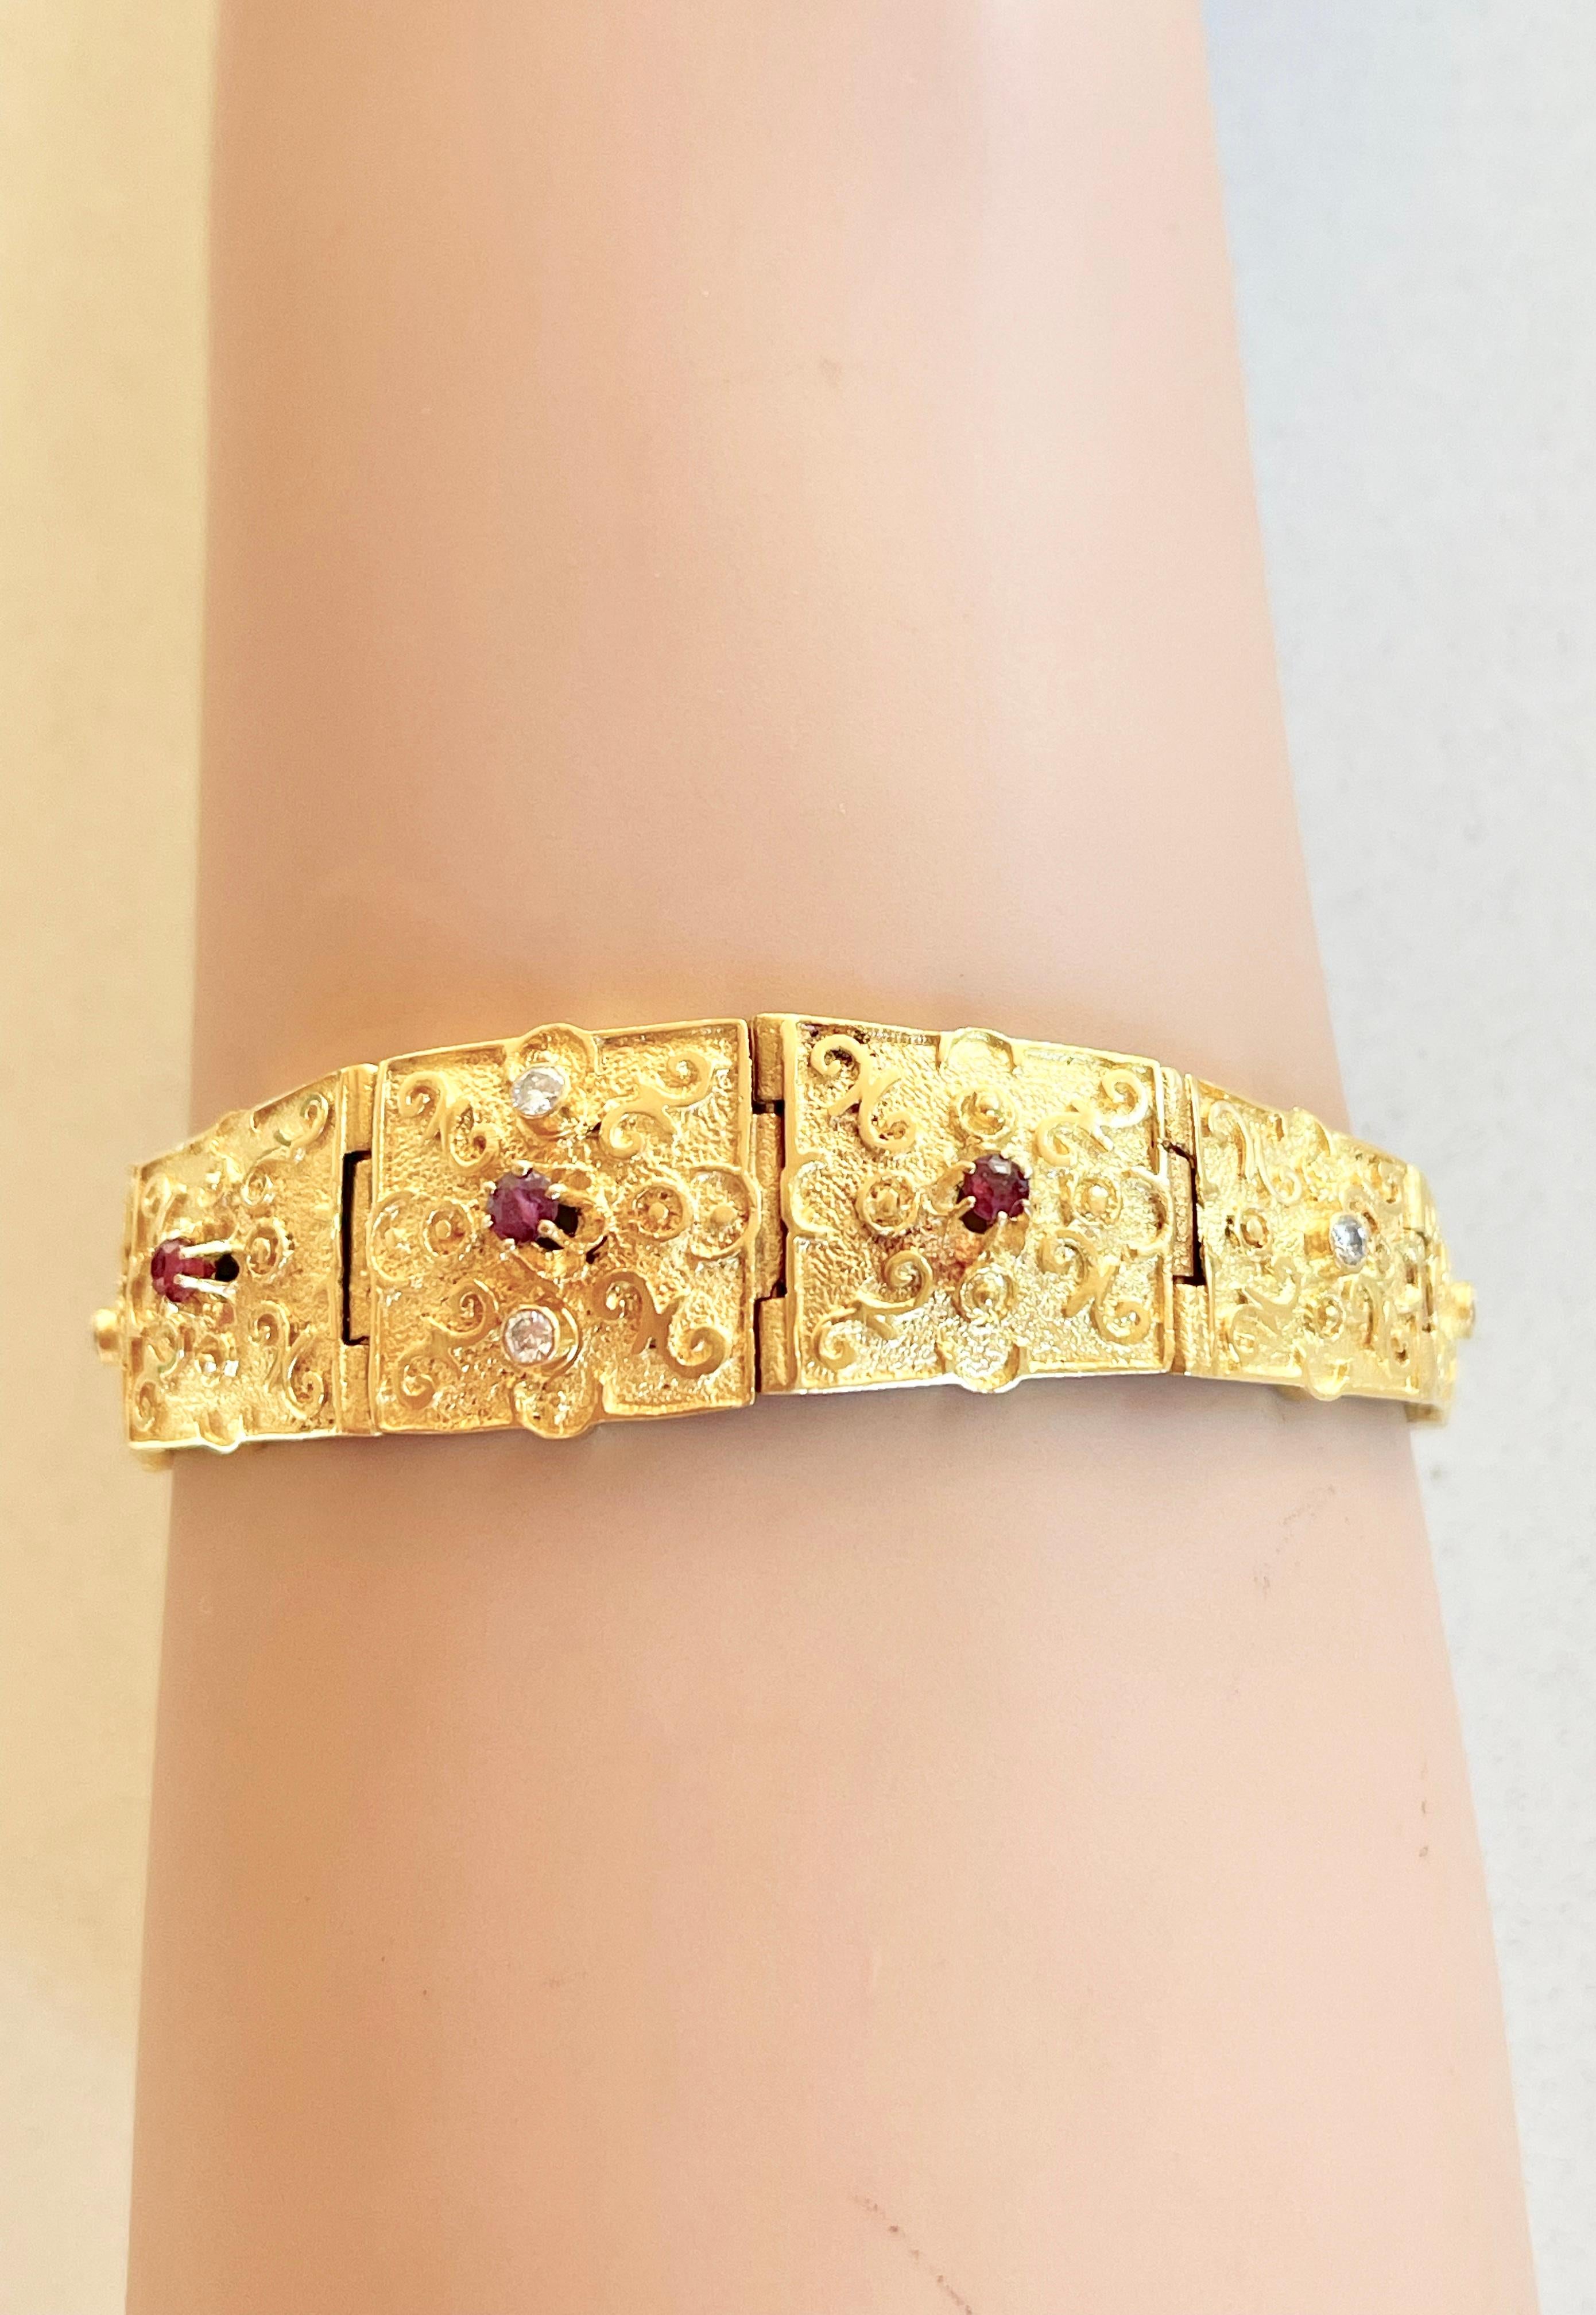 This Unique Bracelet cannot be repeated and the pictures speak for themselves.

The bracelet is solid 18ct gold and weighs 23 grams  The colour of the gold is rich and warm.  It is set with little natural Rubies and Diamonds.  Each panel is also